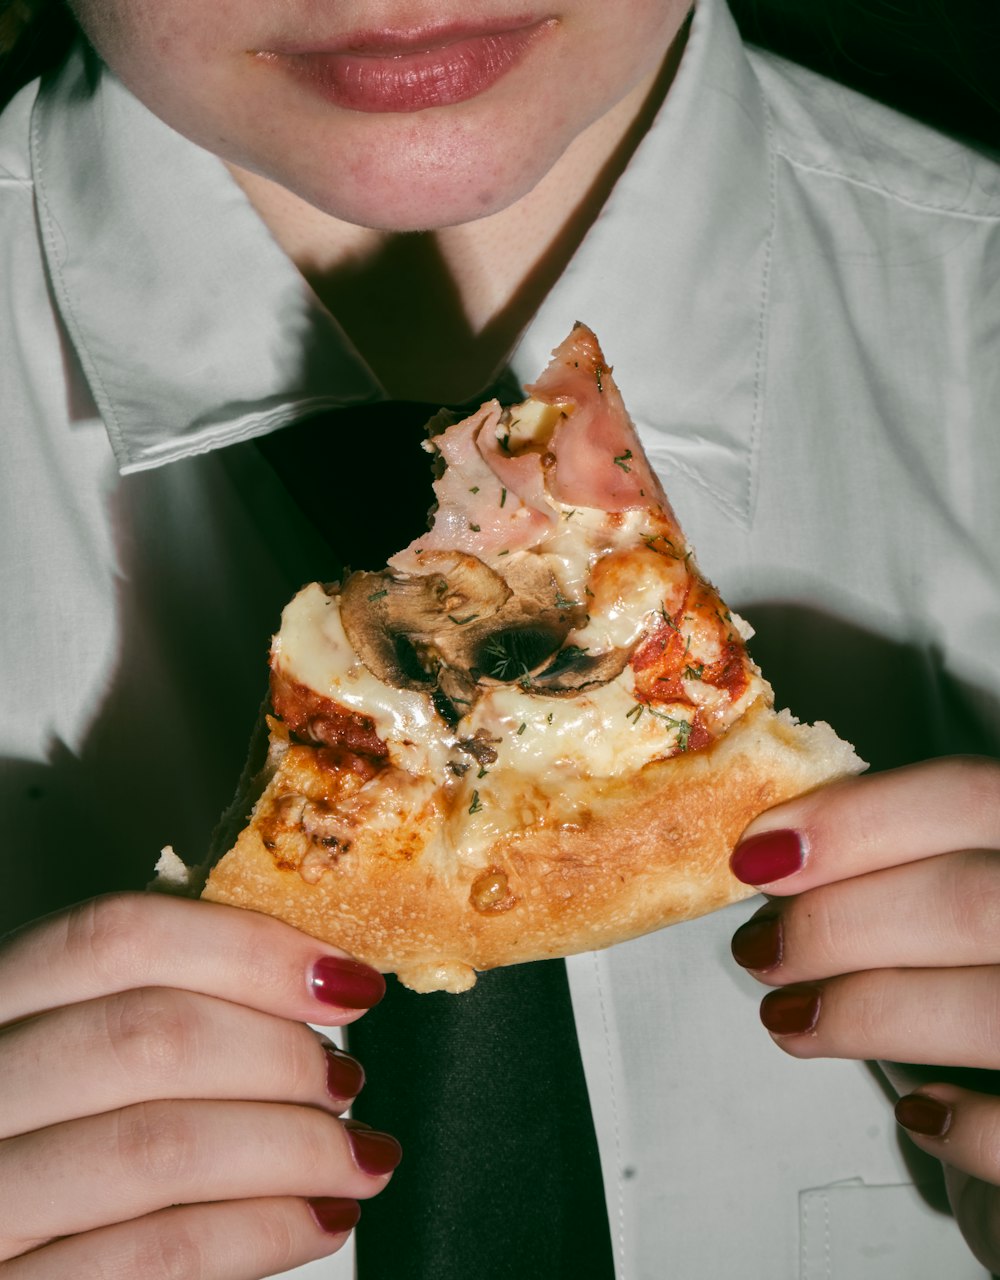 a woman holding a slice of pizza in her hands